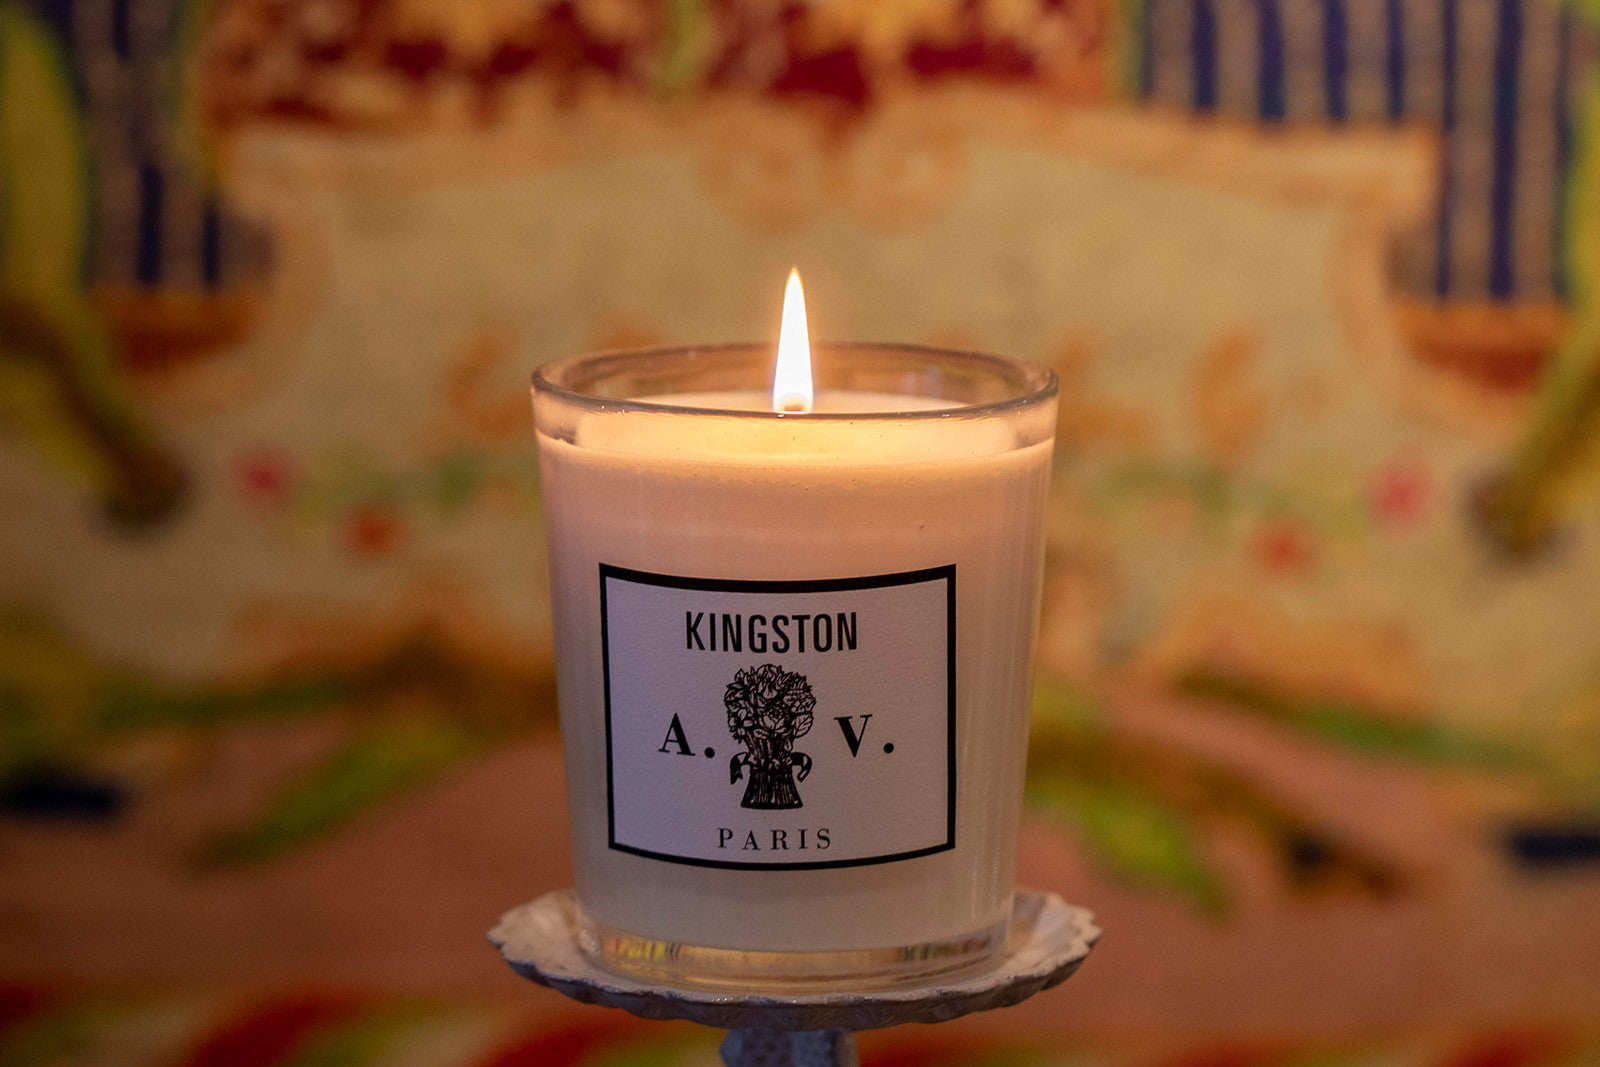 Kingston scented candle